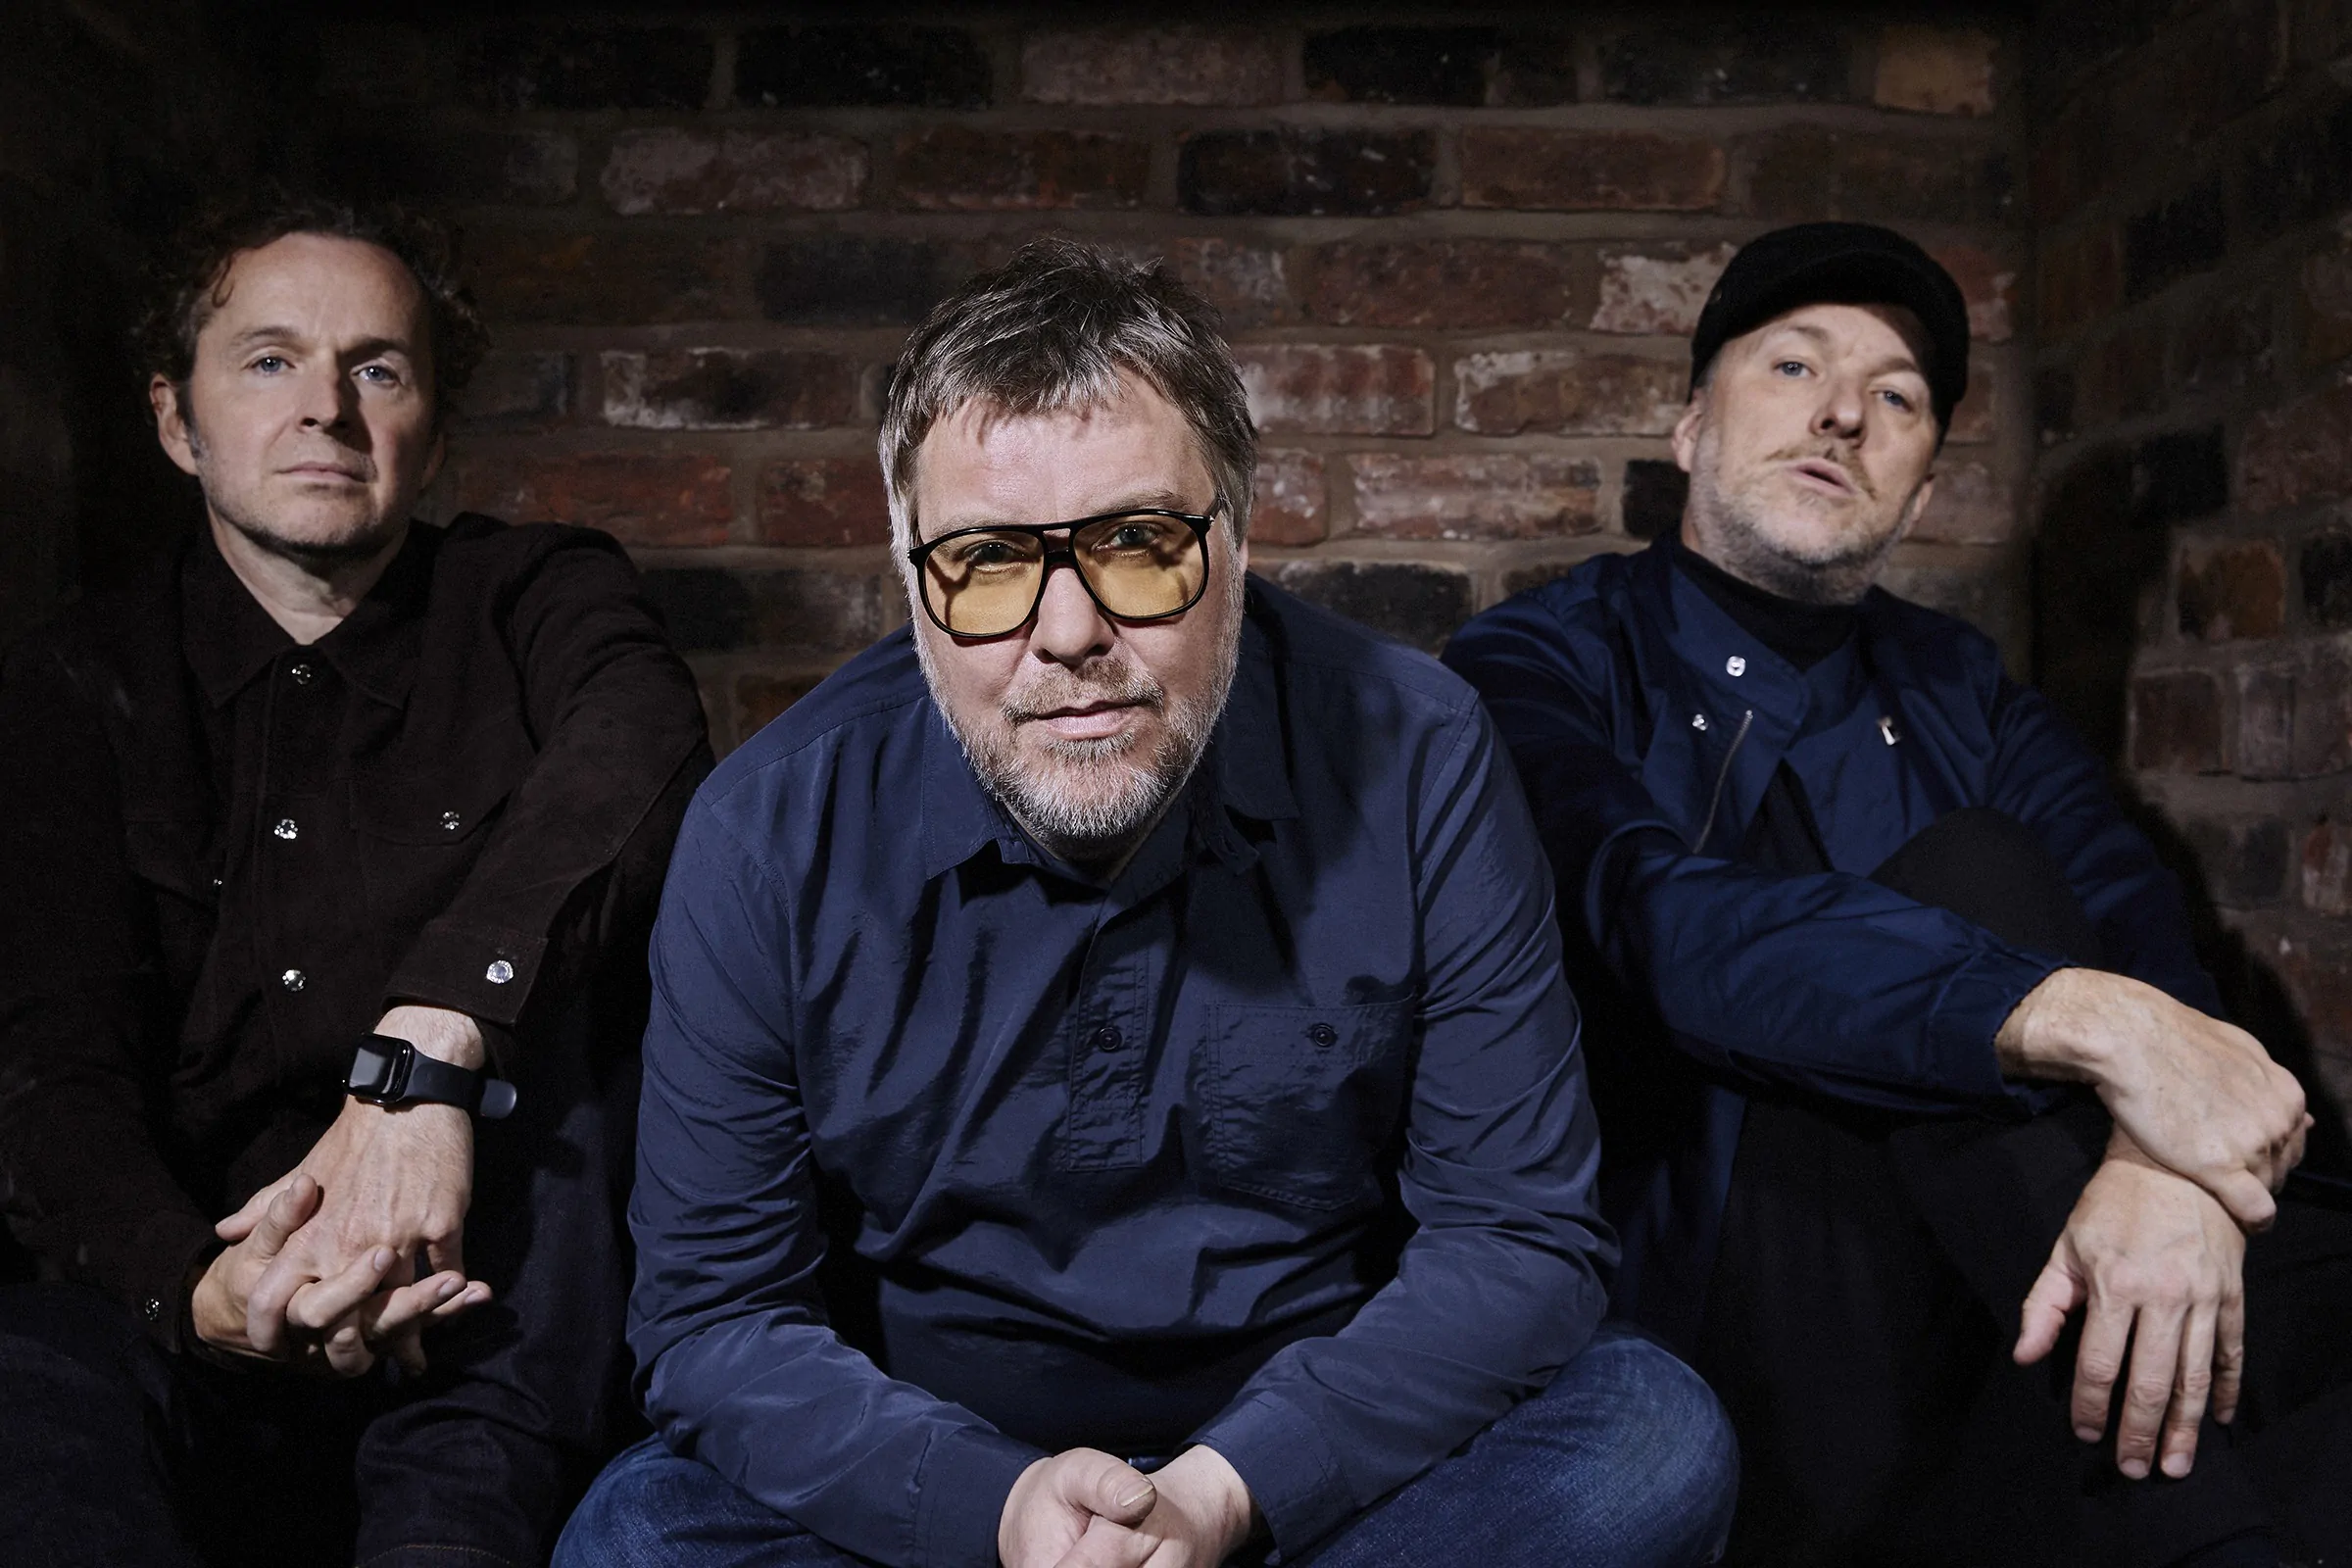 INTERVIEW: Andy Williams of DOVES discusses their fifth album, The Universal Want